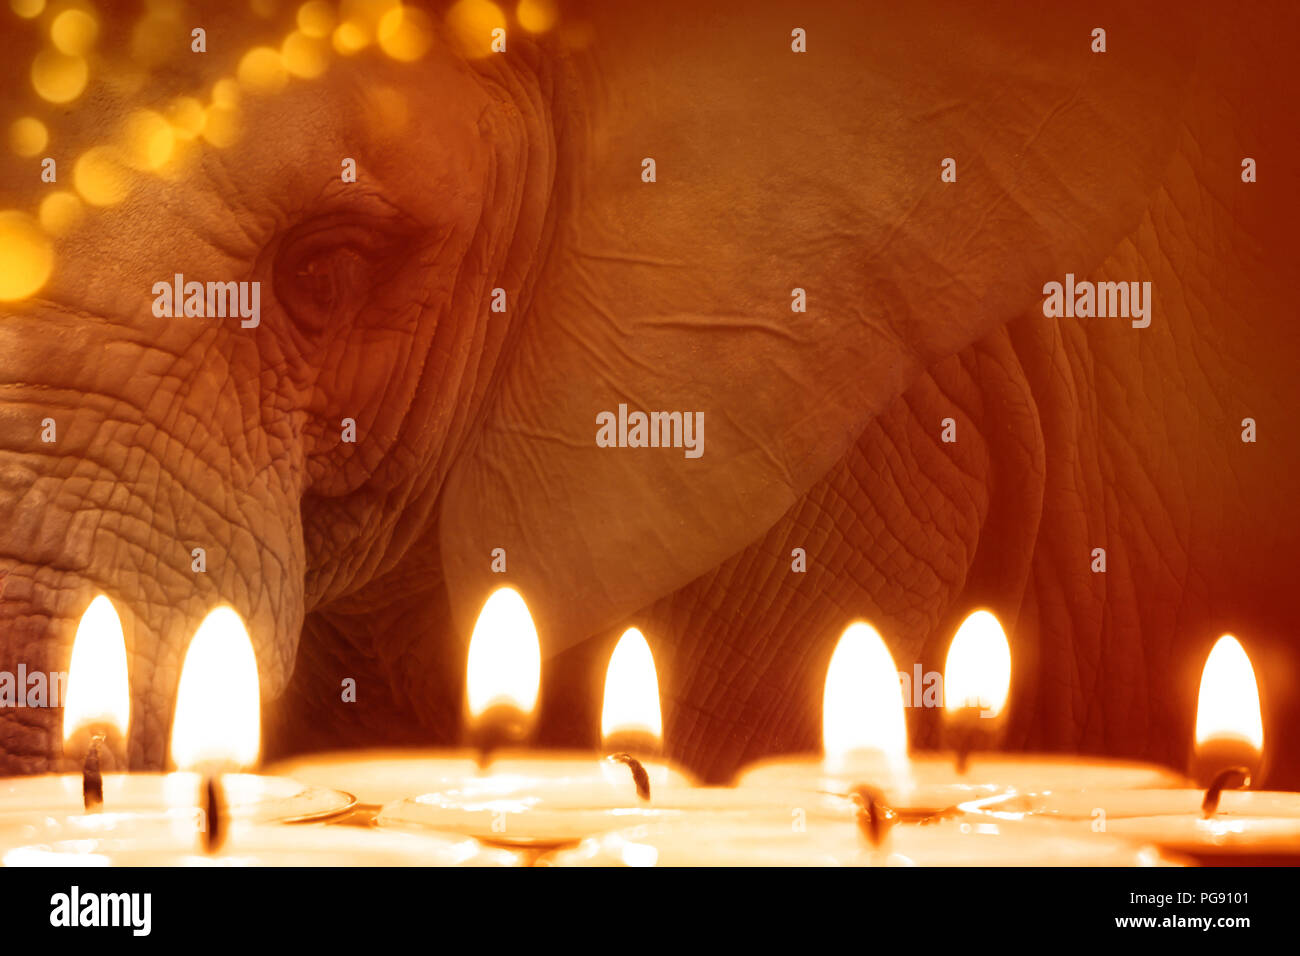 festival of lights background with elephant Stock Photo